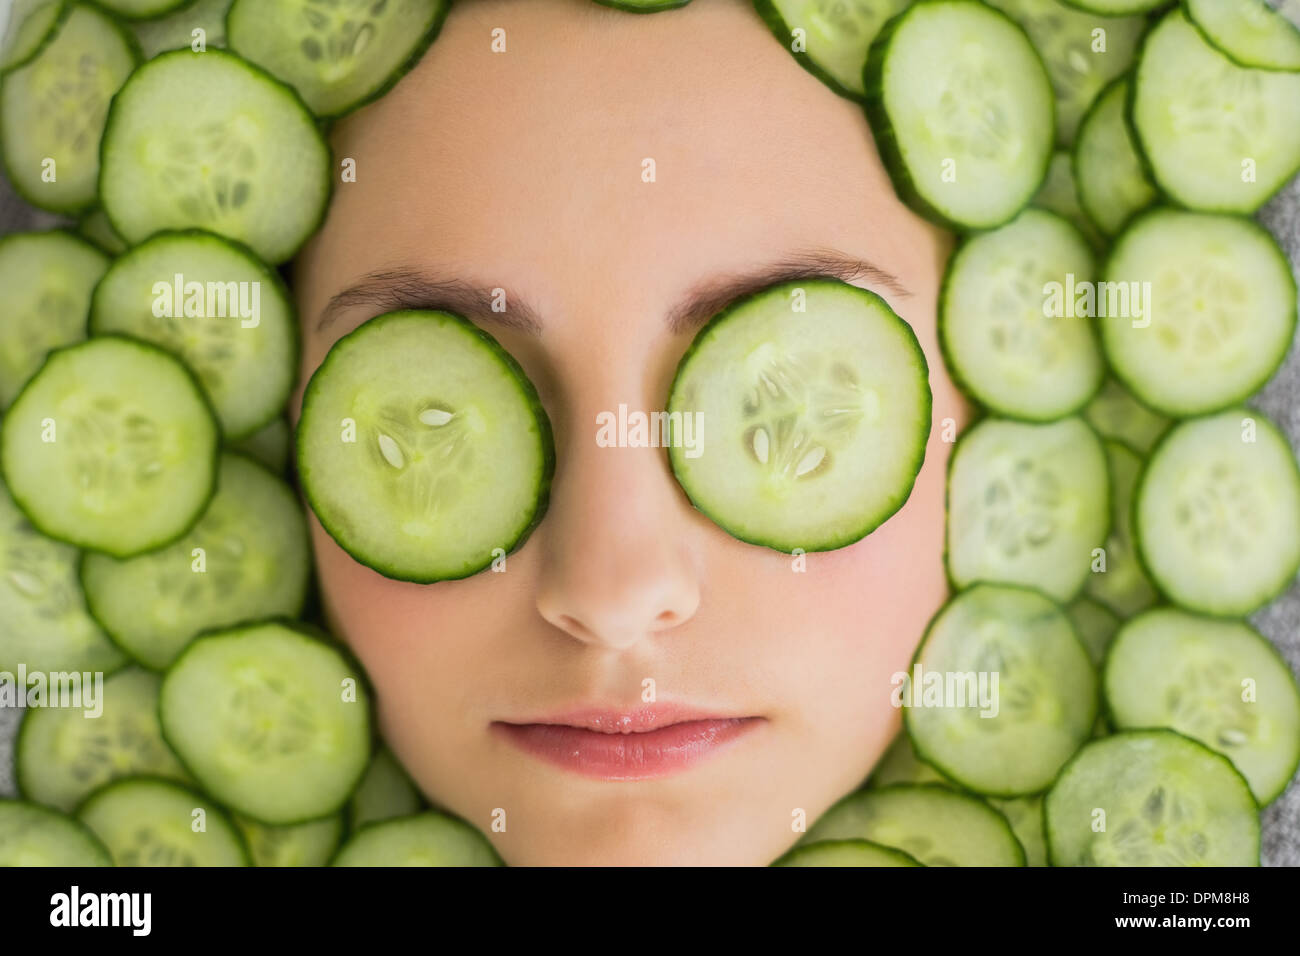 Beautiful woman with facial mask of cucumber slices on face Stock Photo